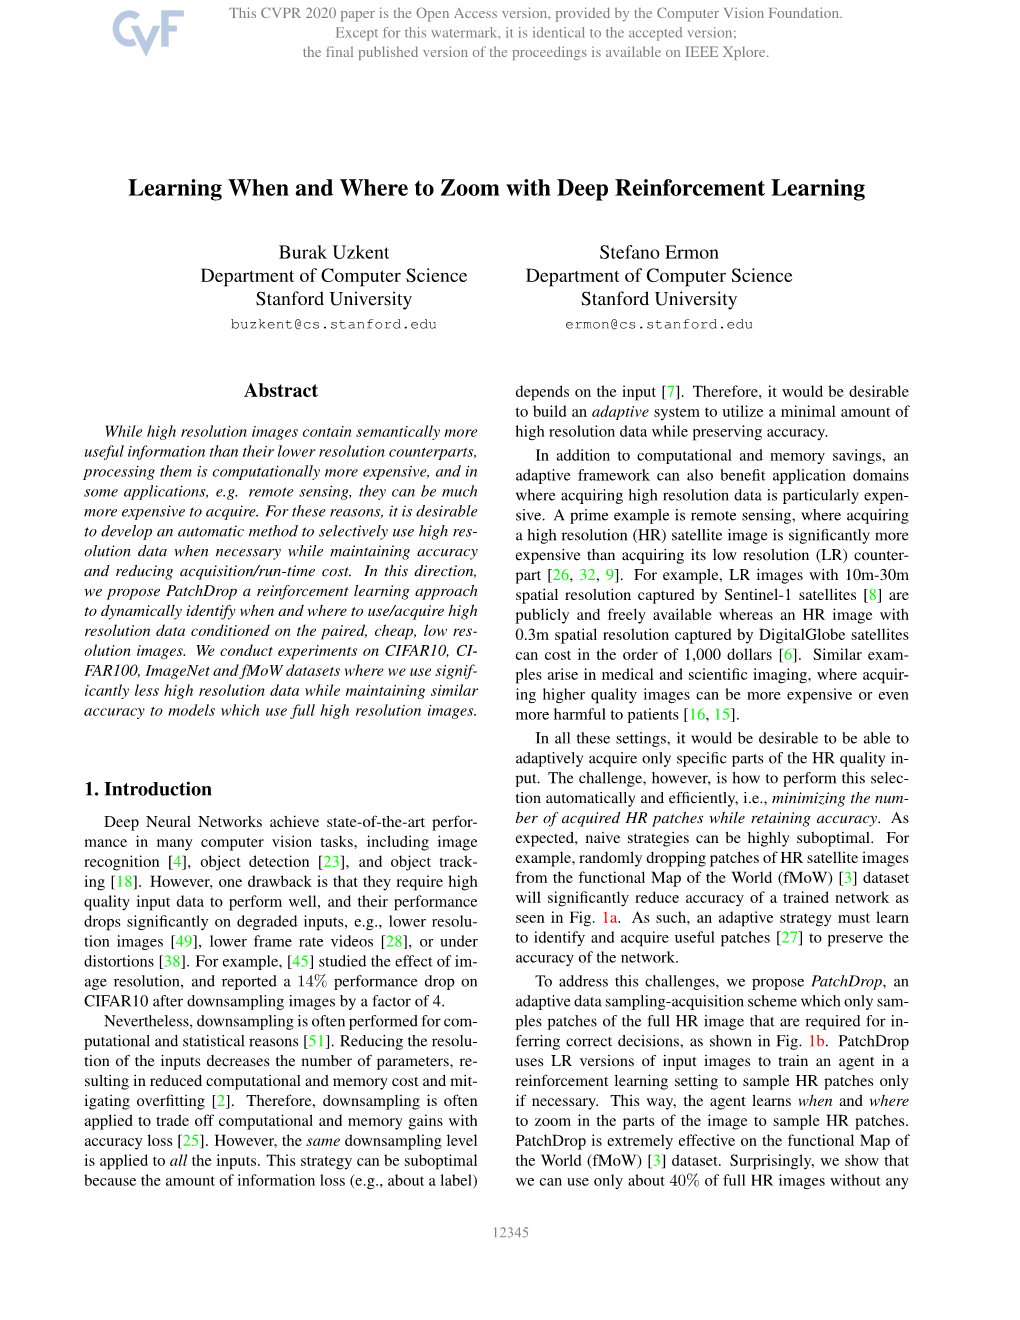 Learning When and Where to Zoom with Deep Reinforcement Learning